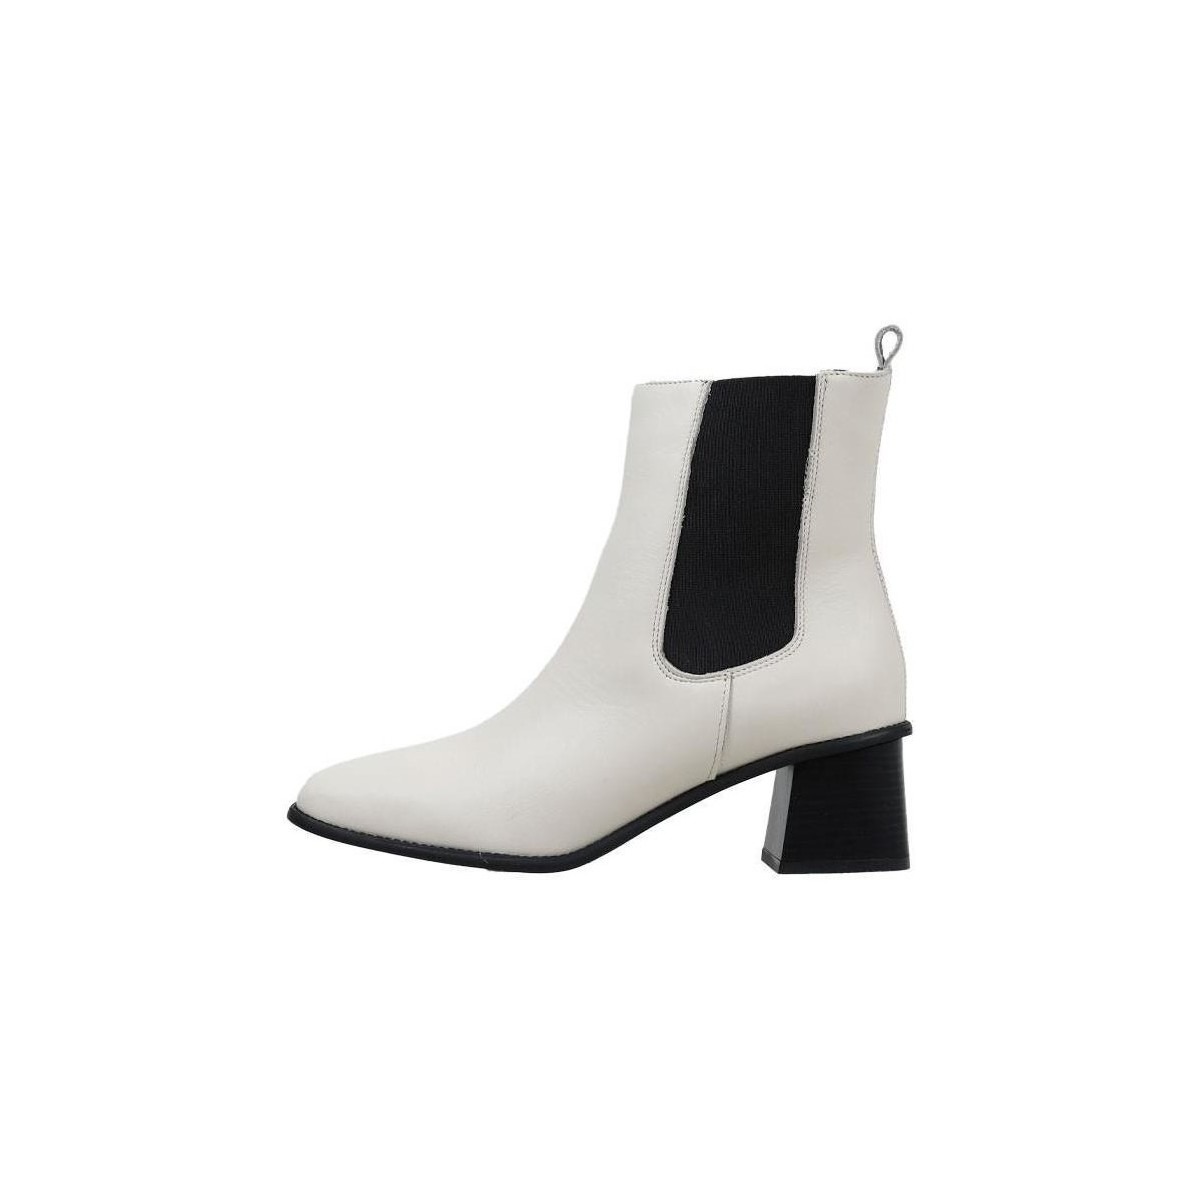 Krack - Women Ankle Boots in Beige from Spartoo GOOFASH